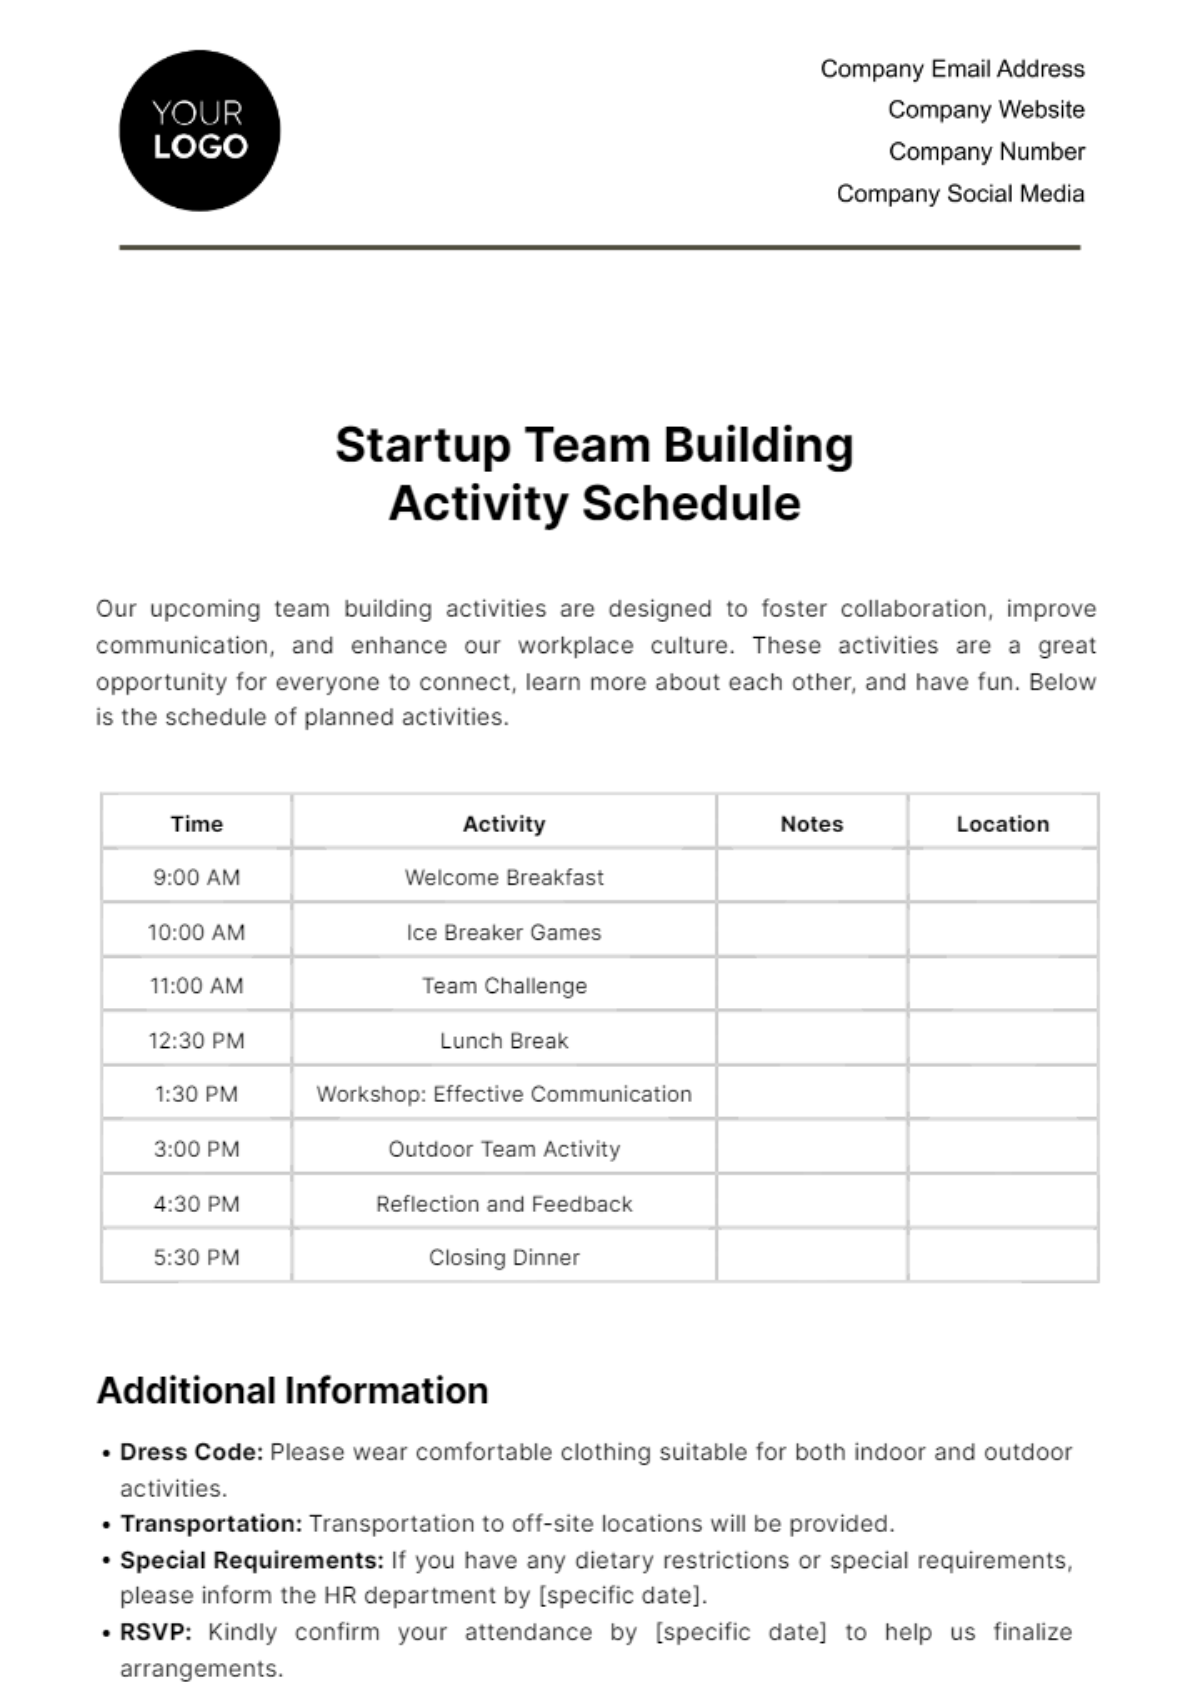 Free Startup Team Building Activity Schedule Template